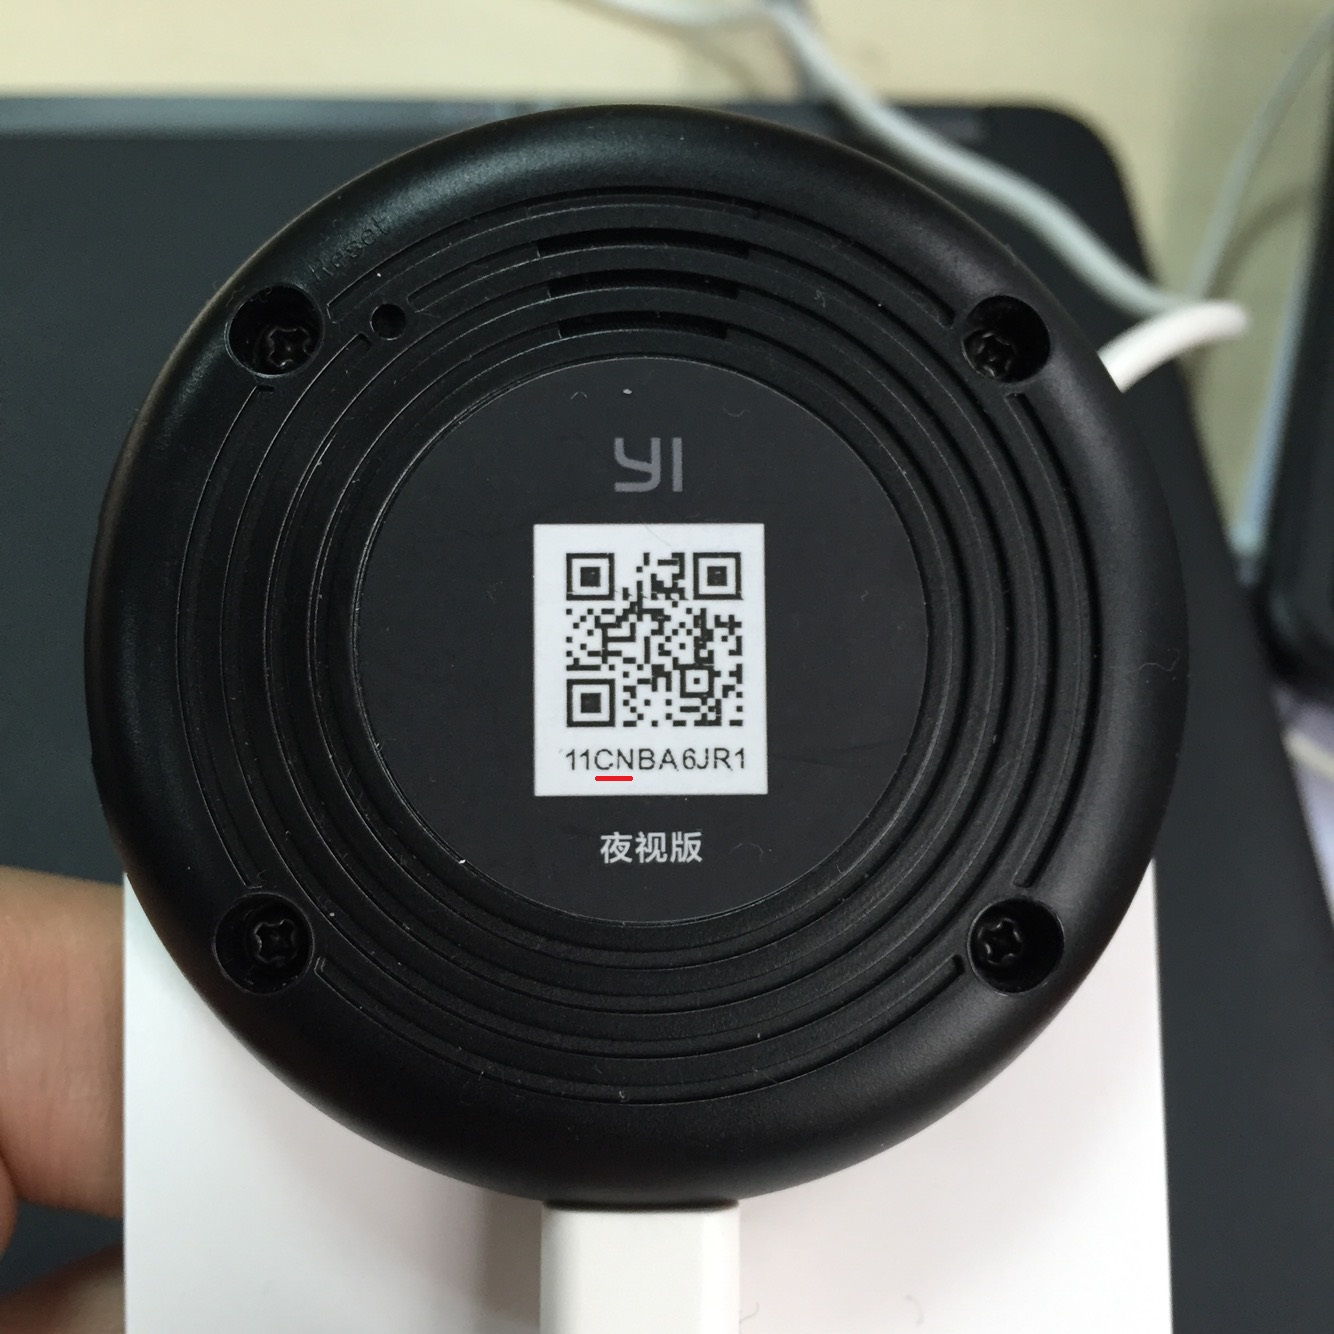 connect yi camera to wifi